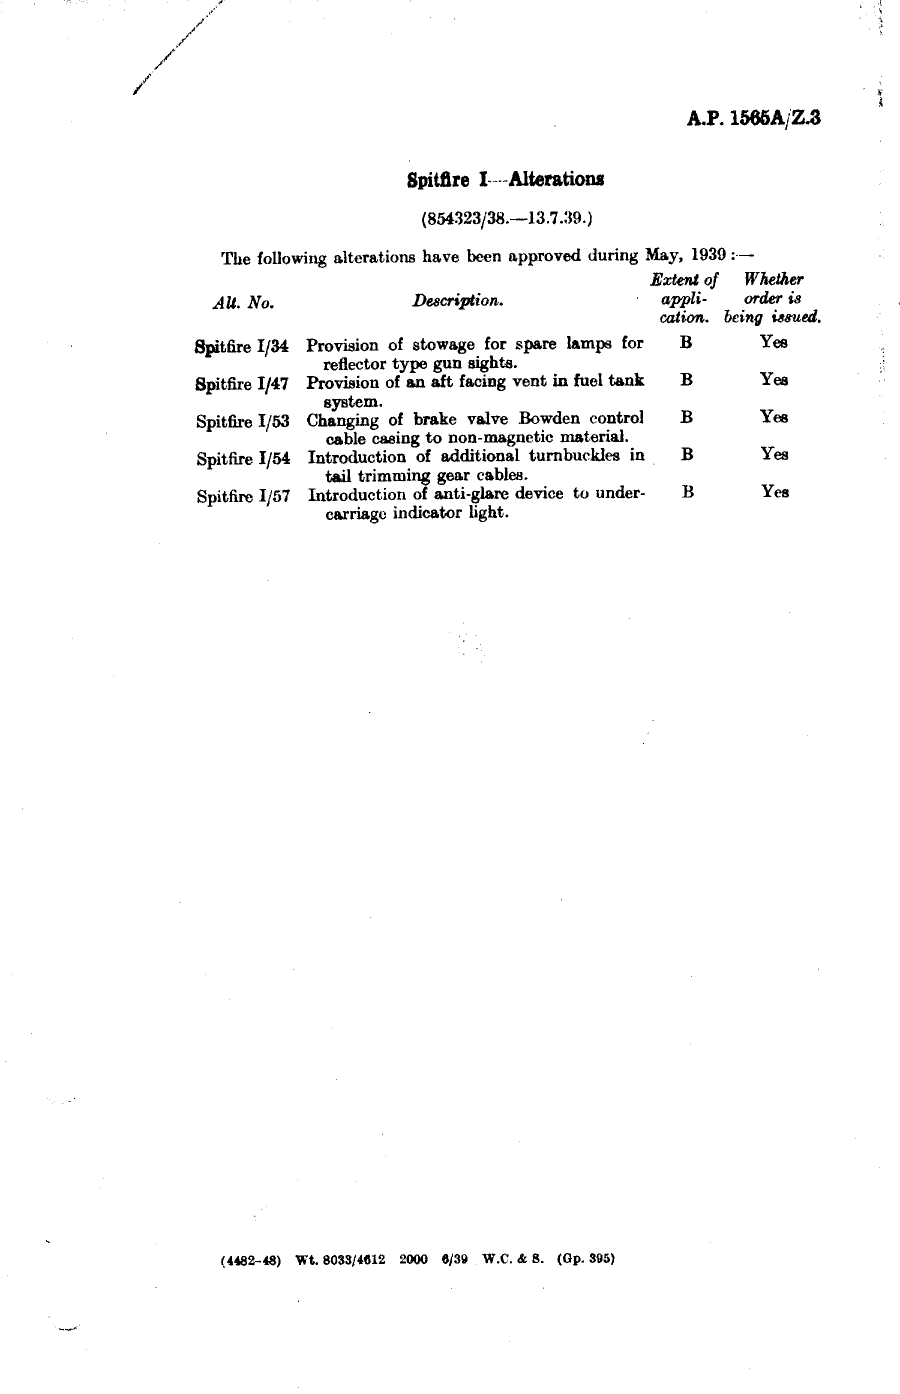 Sample page 1 from AirCorps Library document: Spitfire I Alterations 34, 47, 53, 54 and 57